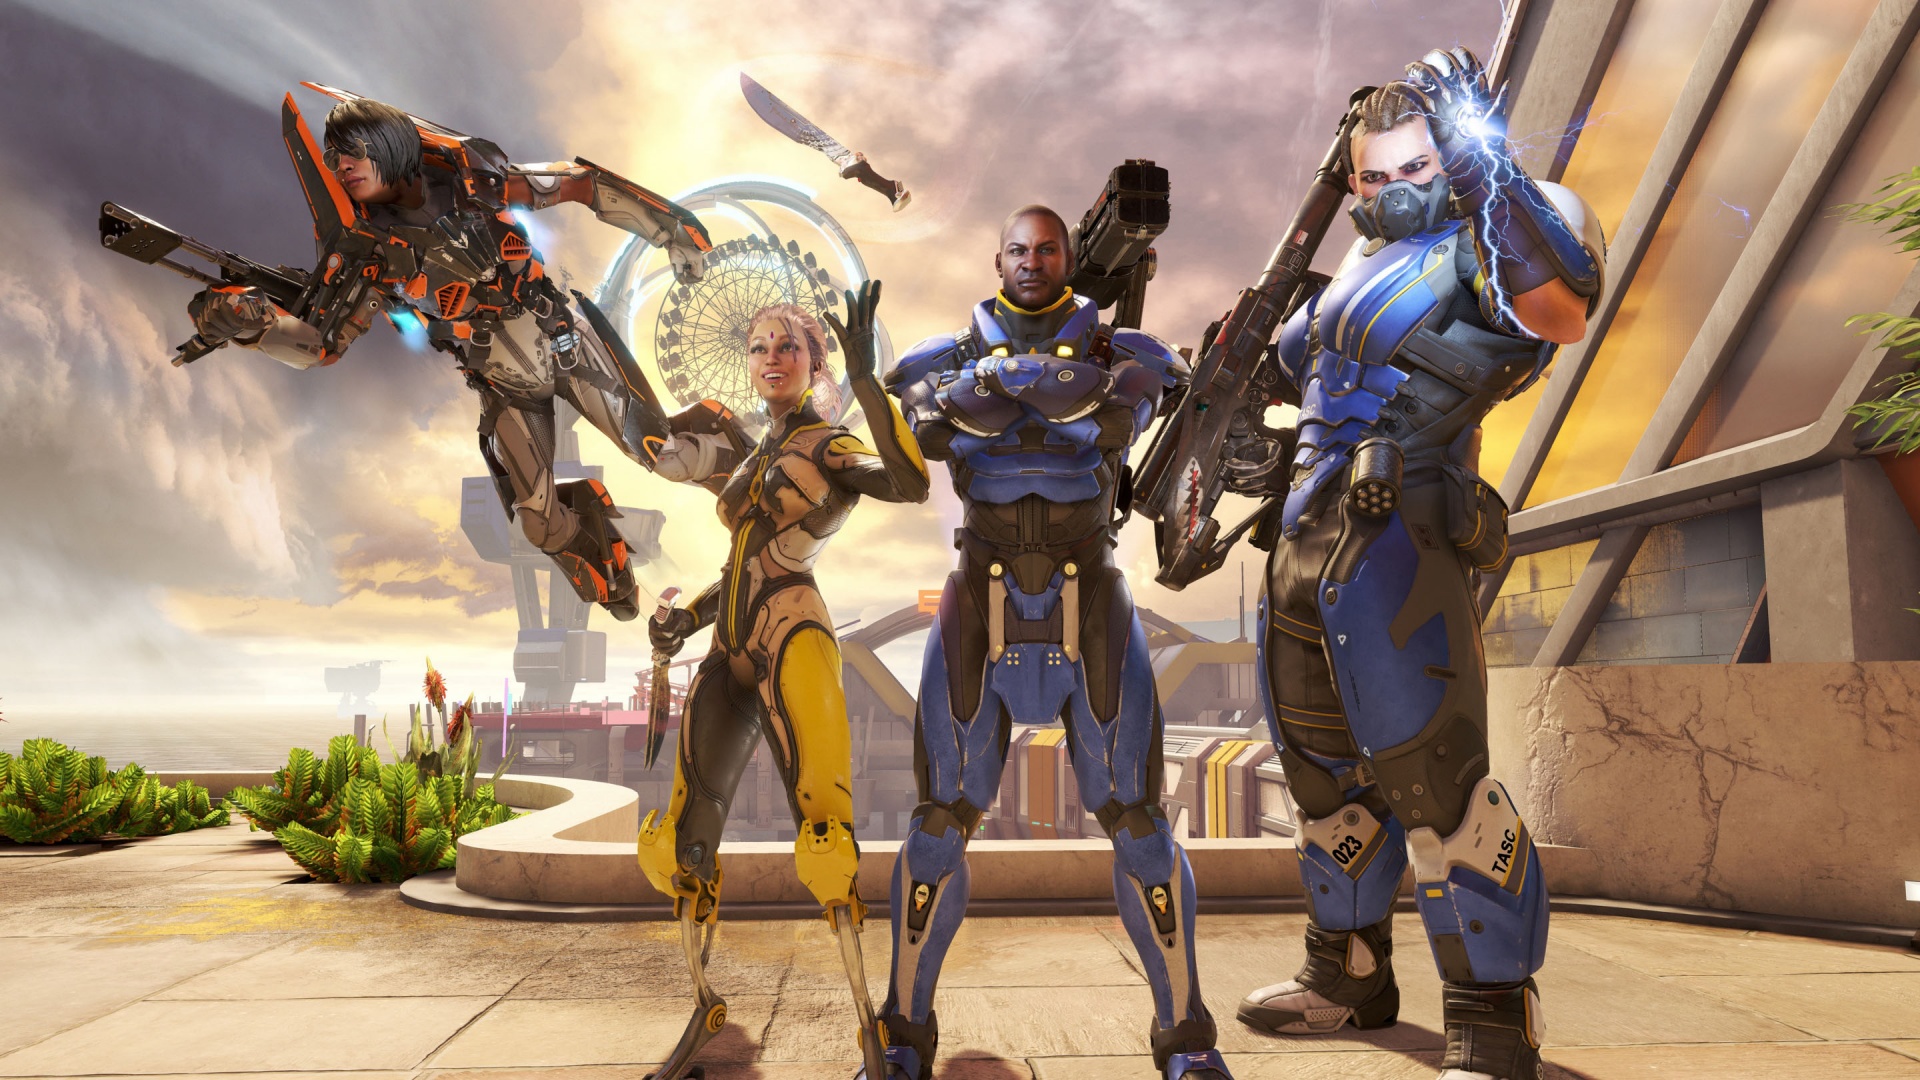 Tips for playing LawBreakers